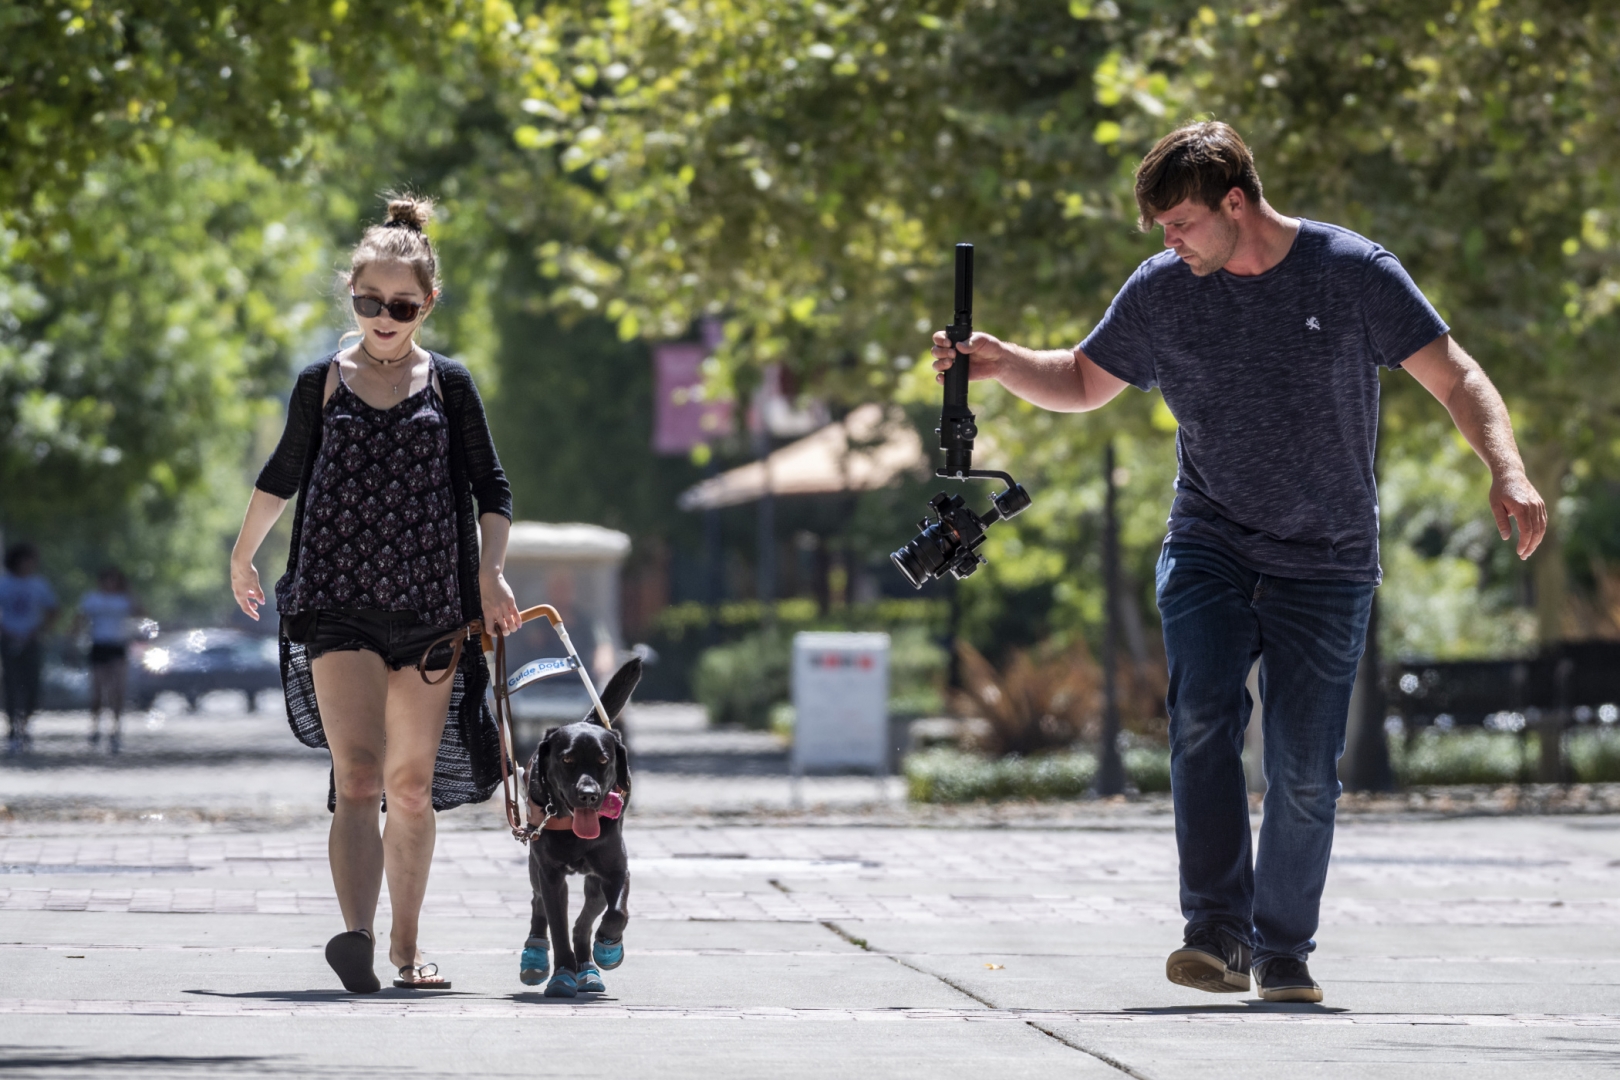 Olivia Merz and Tartan walk down the campus promenade as a videographer holds a camera out alongside them.